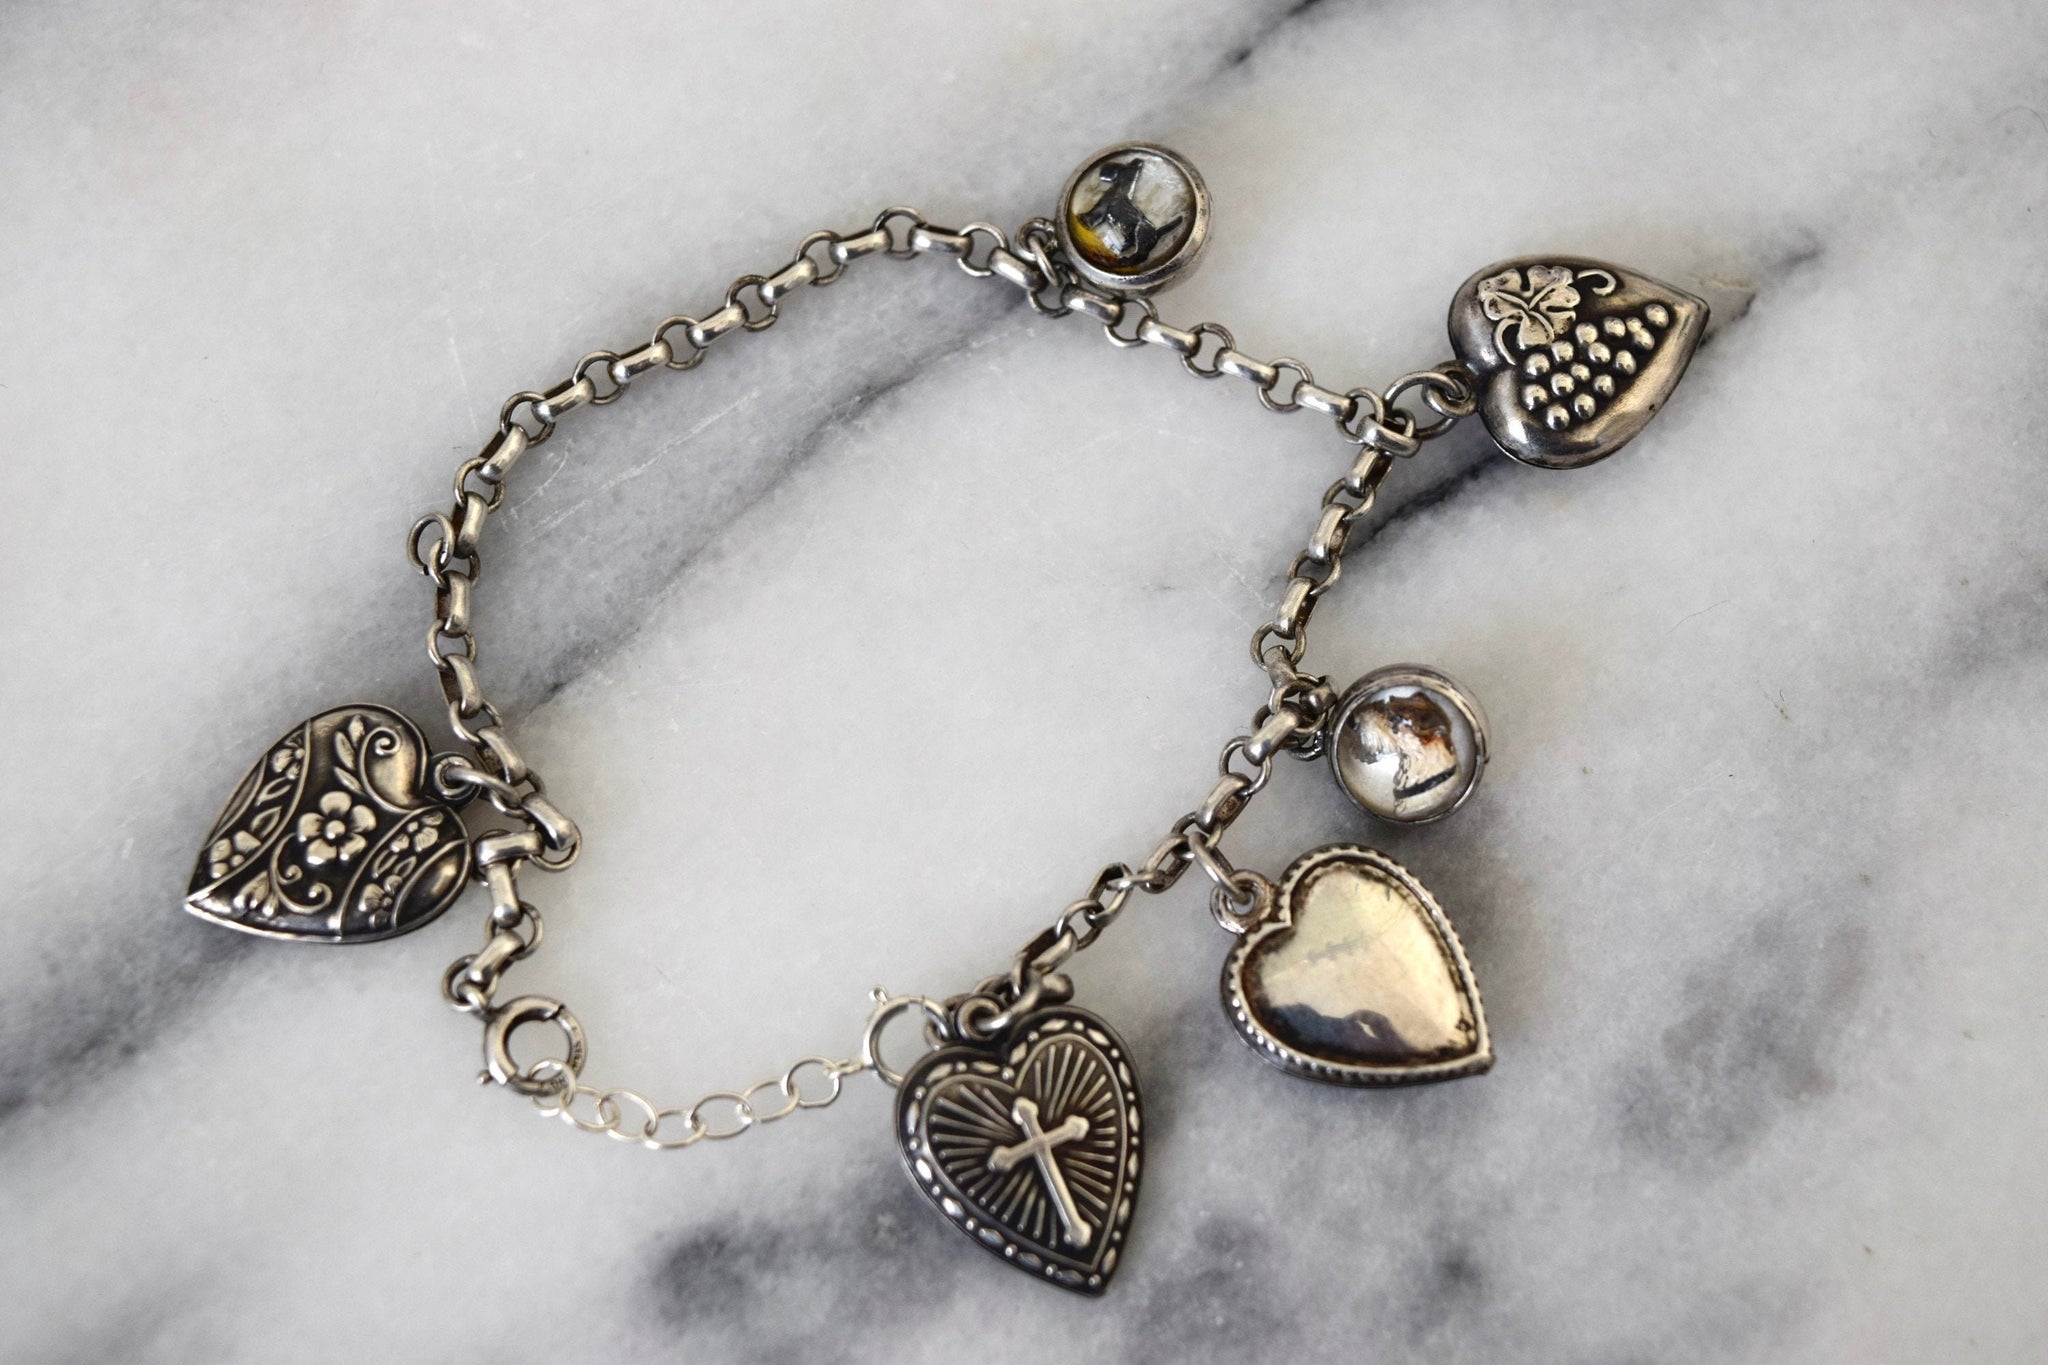 Gold Filled Victorian Revival Chain Bracelet with Heart Locket